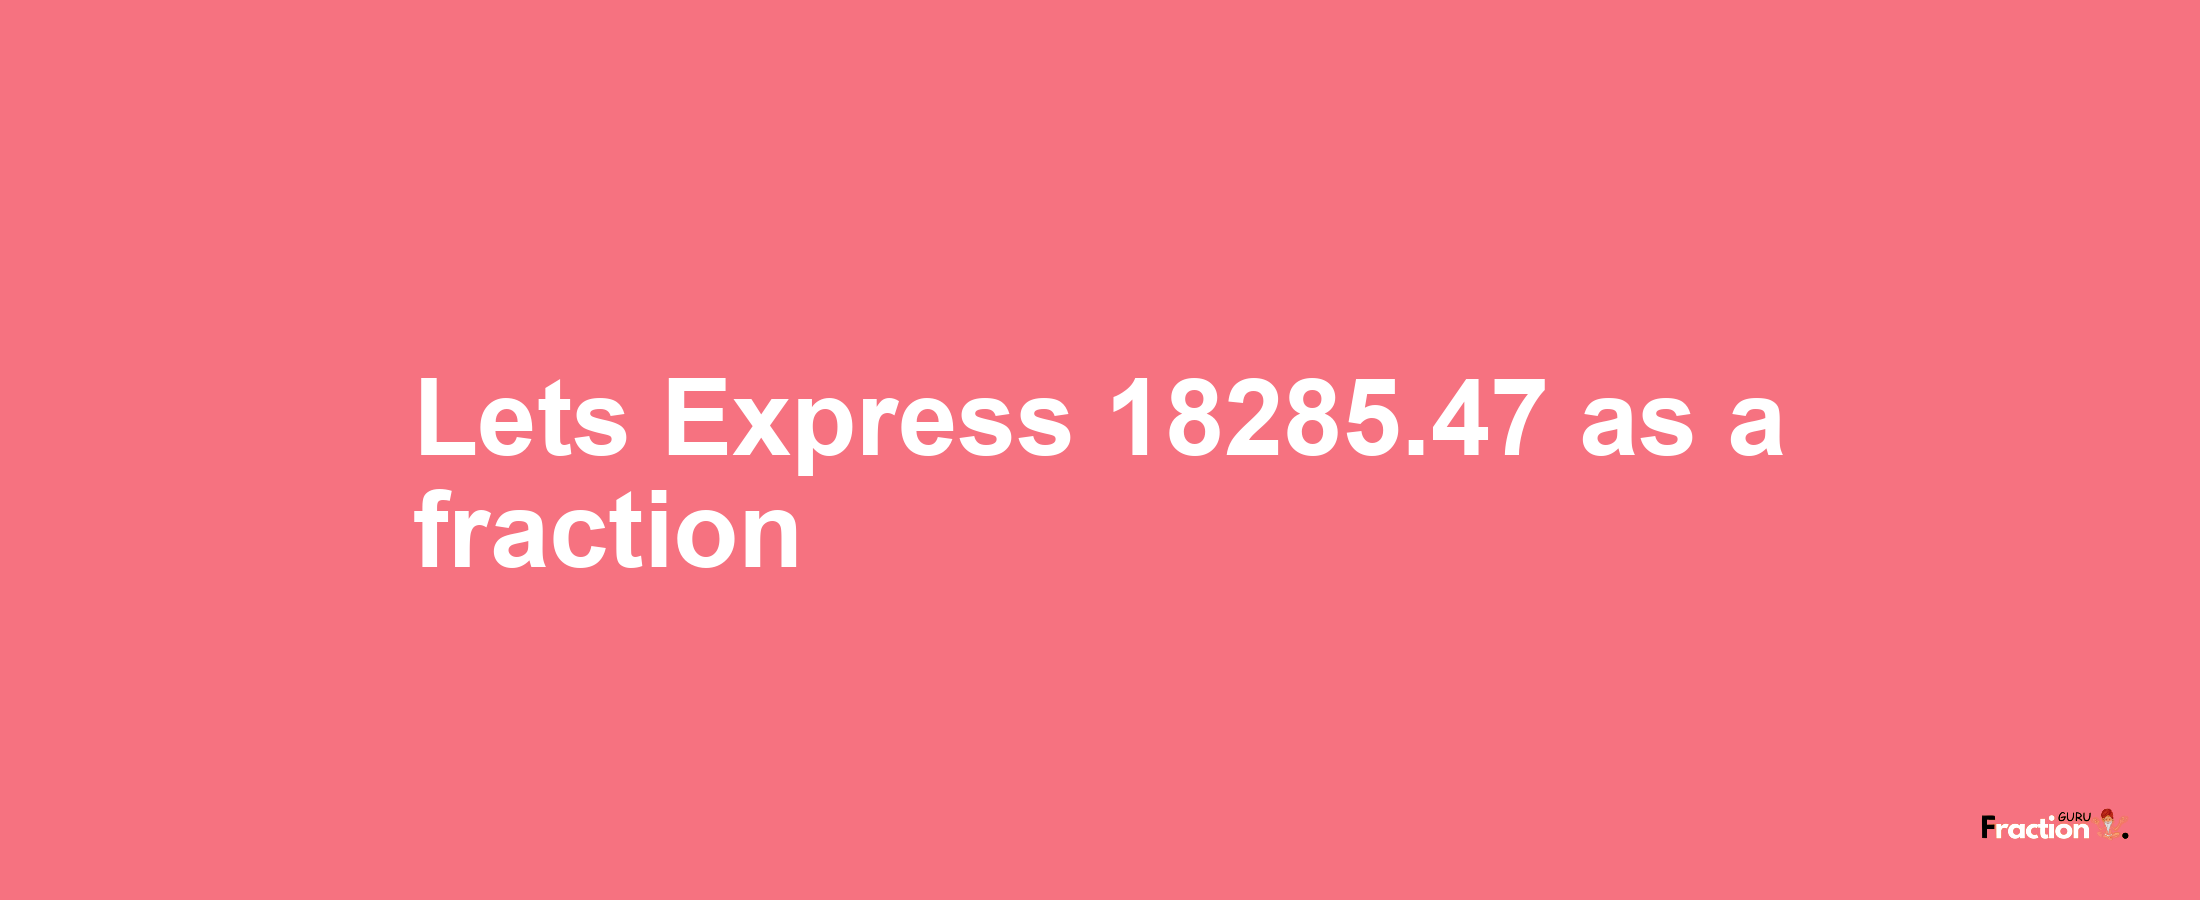 Lets Express 18285.47 as afraction